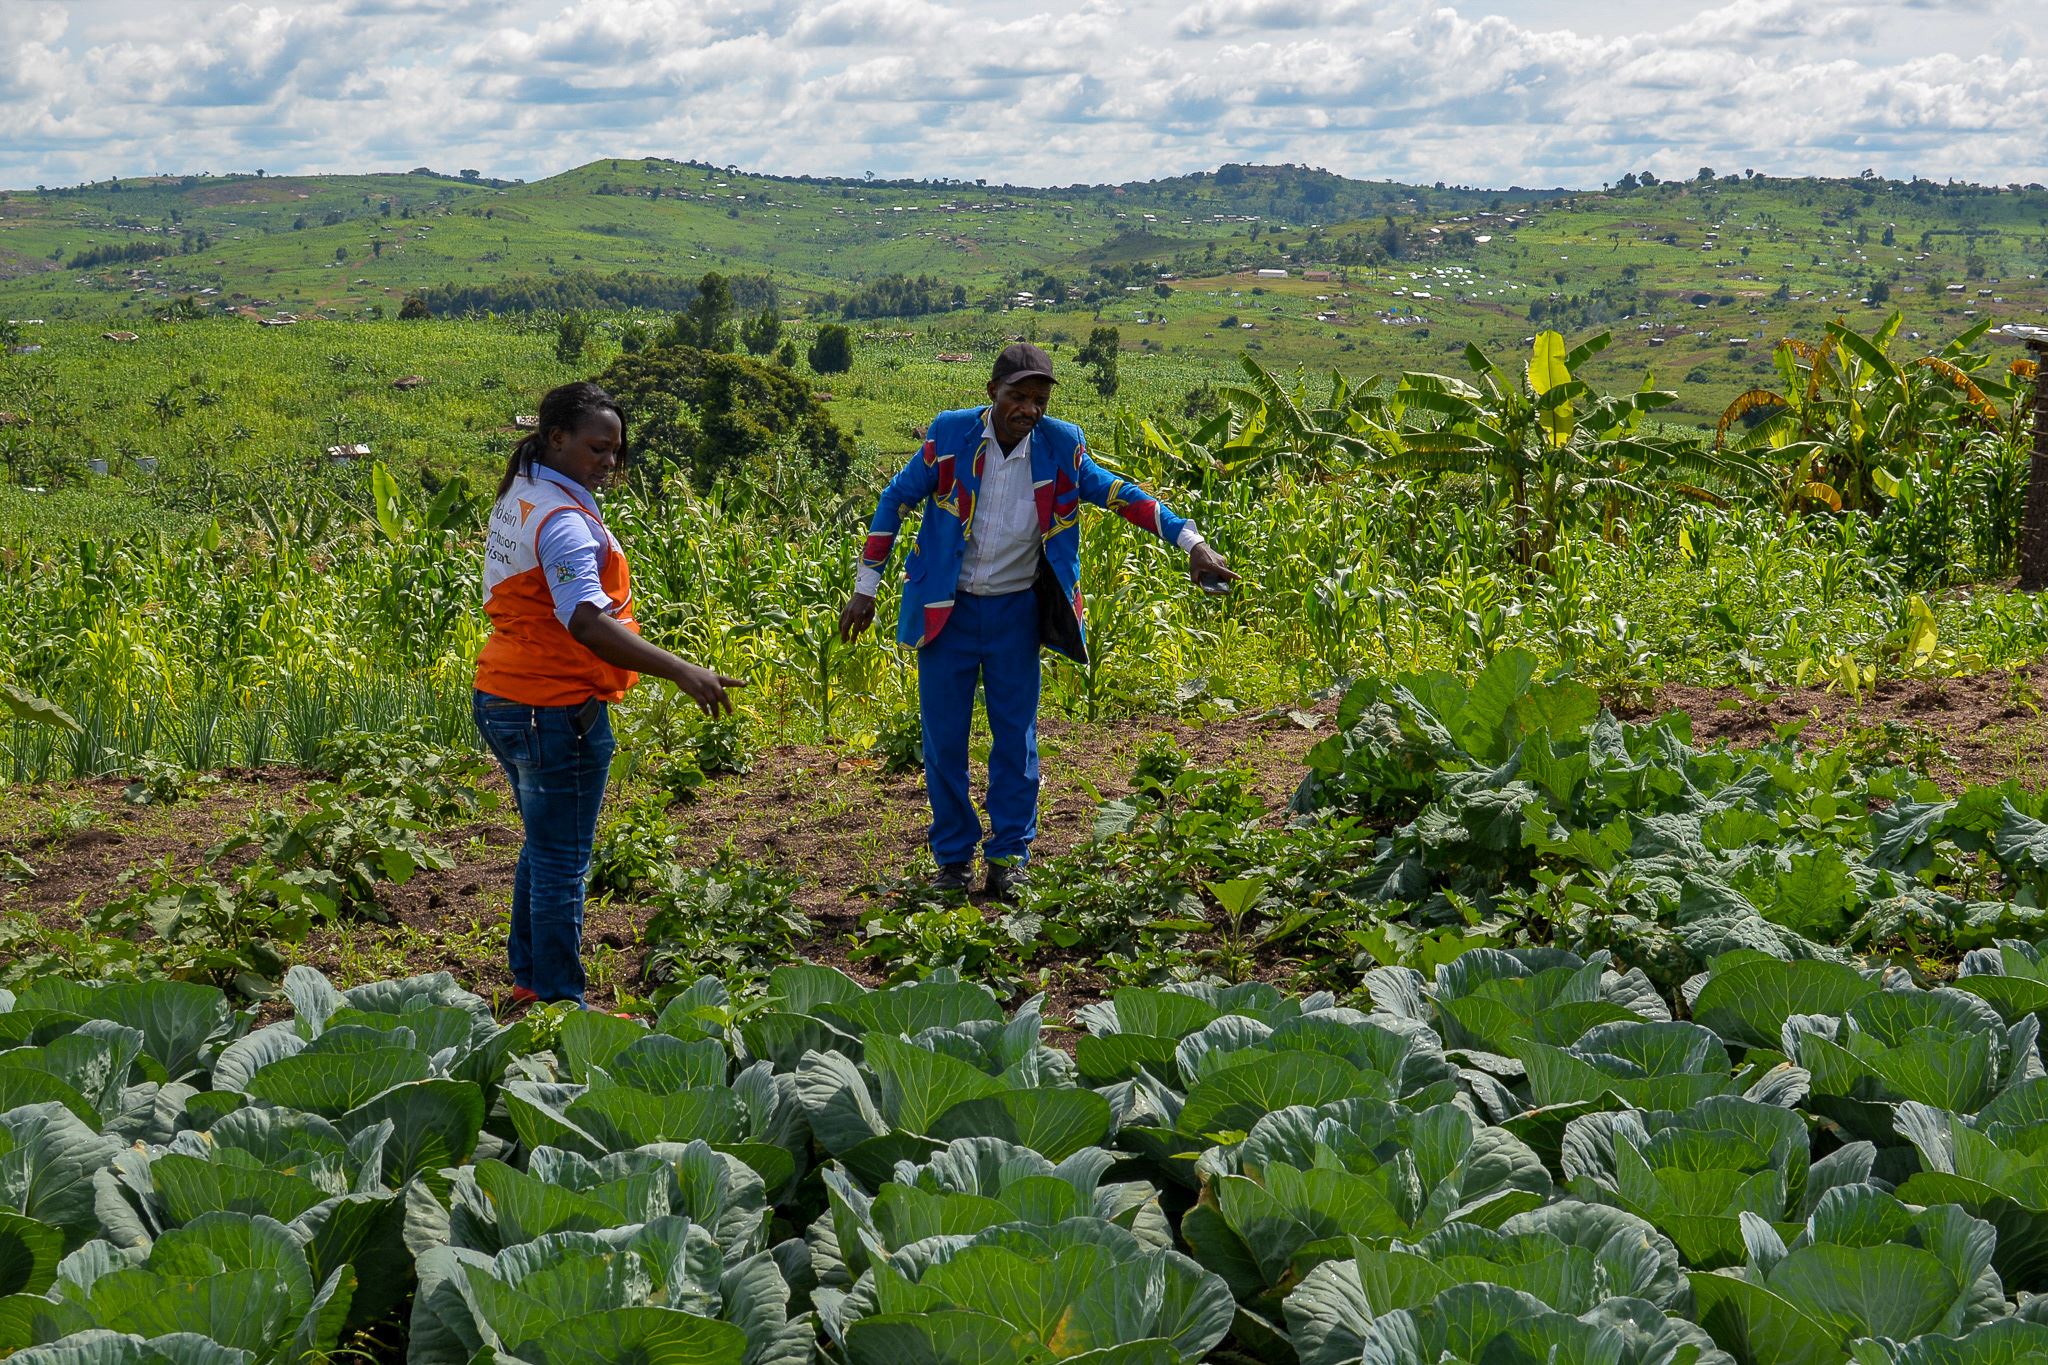 Man and woman next to crops in Uganda field